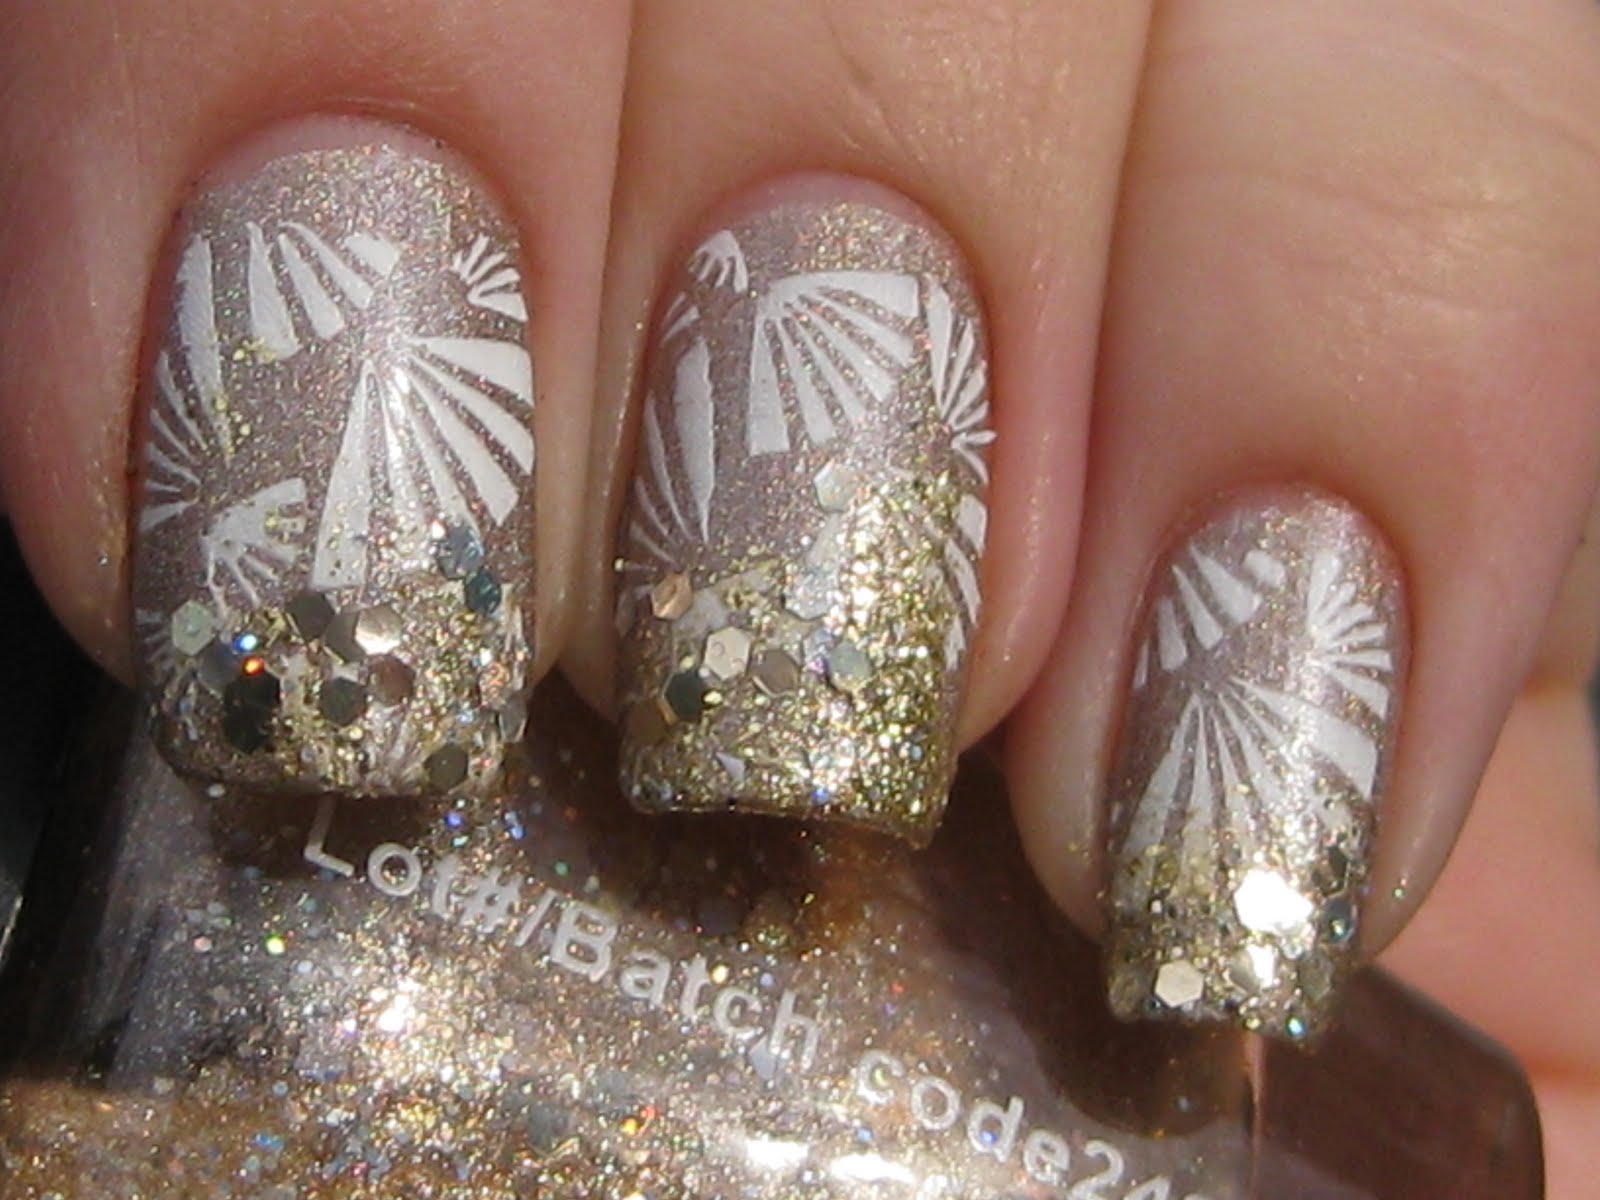 Imperfectly Painted: Guest Post: Glitta Gloves-Ocean Manicure